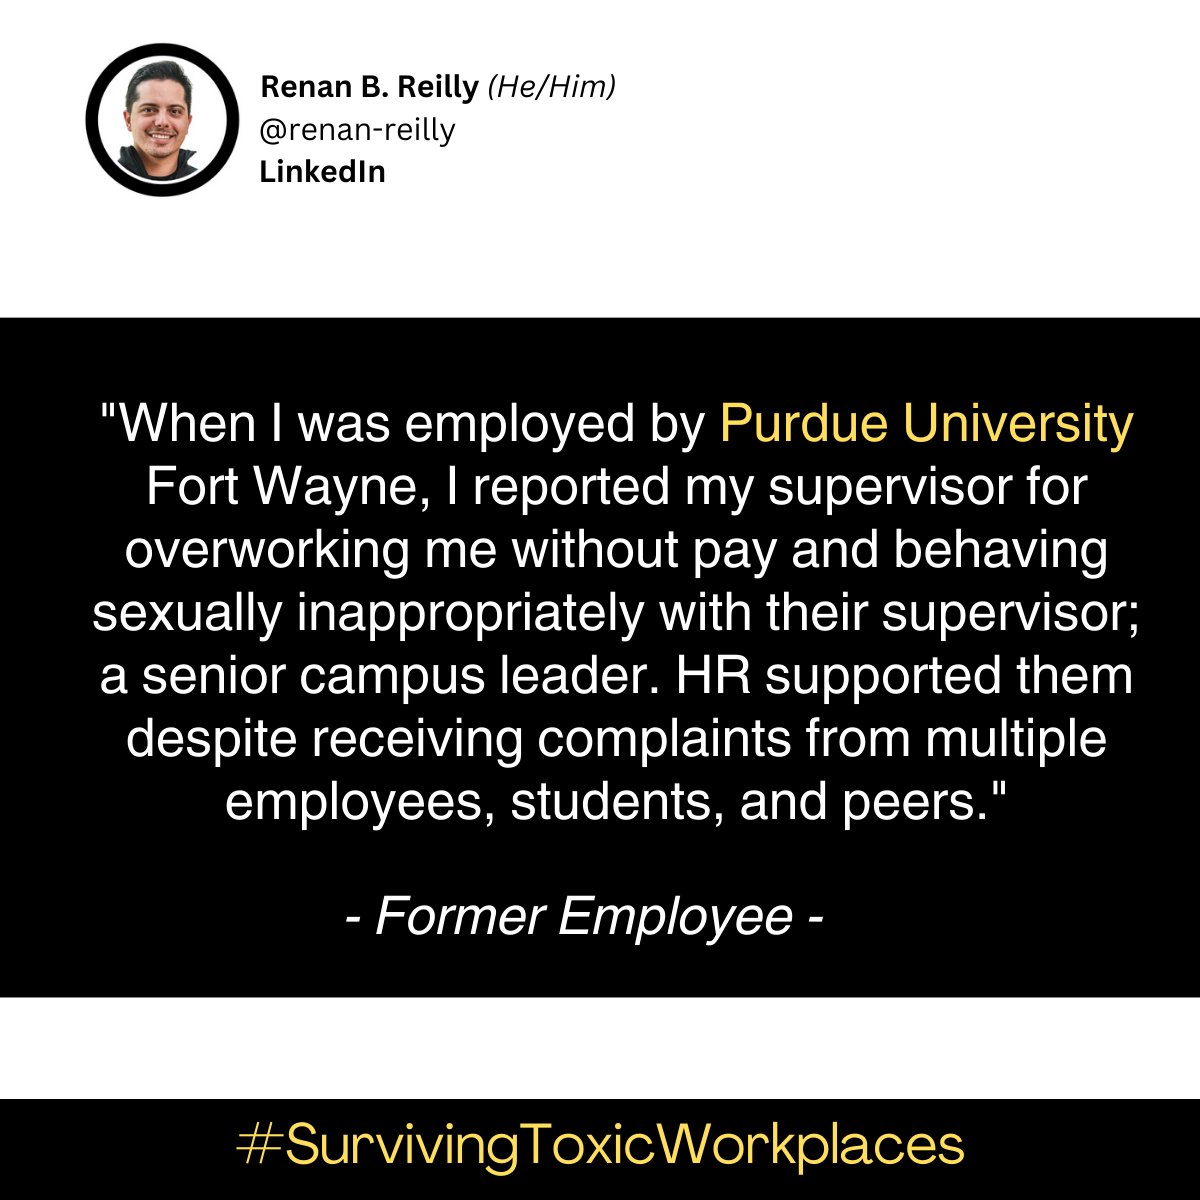 𝗗𝗢 𝗬𝗢𝗨 𝗔𝗚𝗥𝗘𝗘? Silent No More: Say 𝐍𝐎 to toxic and hostile higher education work environments. Full post: linkedin.com/in/renan-reill…

#support #WeMustDoBetter #HigherEducation #RenanReilly #students #HR #linkedin #socialmedia #experience  #SurvivingToxicWorkplaces